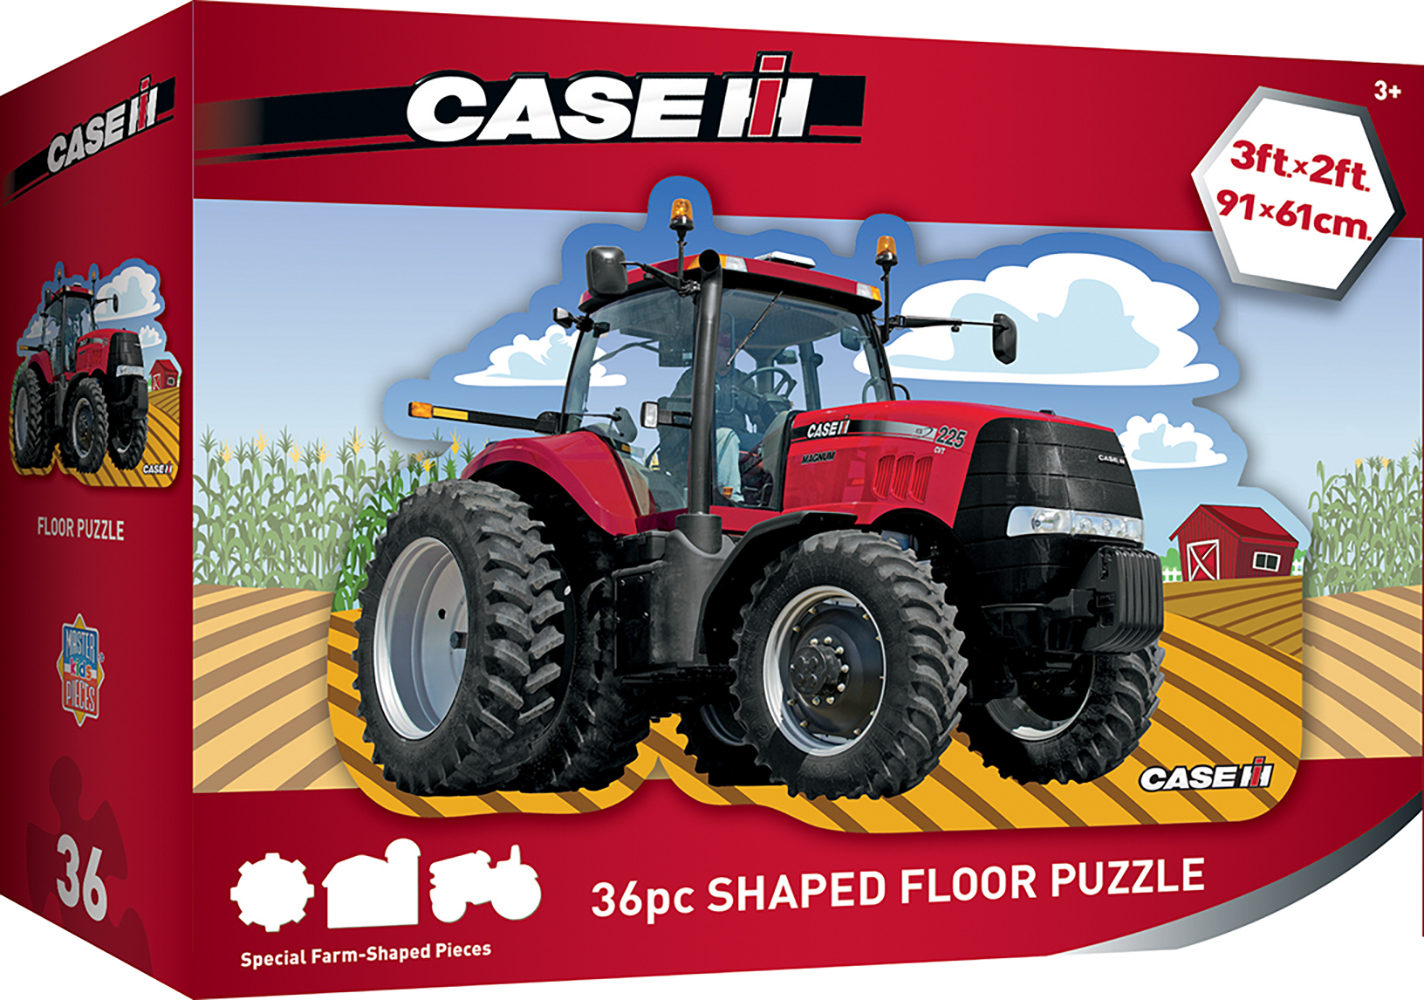 MA-11472 - Case IH Red Tractor - 36 Piece Kids Shaped Floor Puzzle